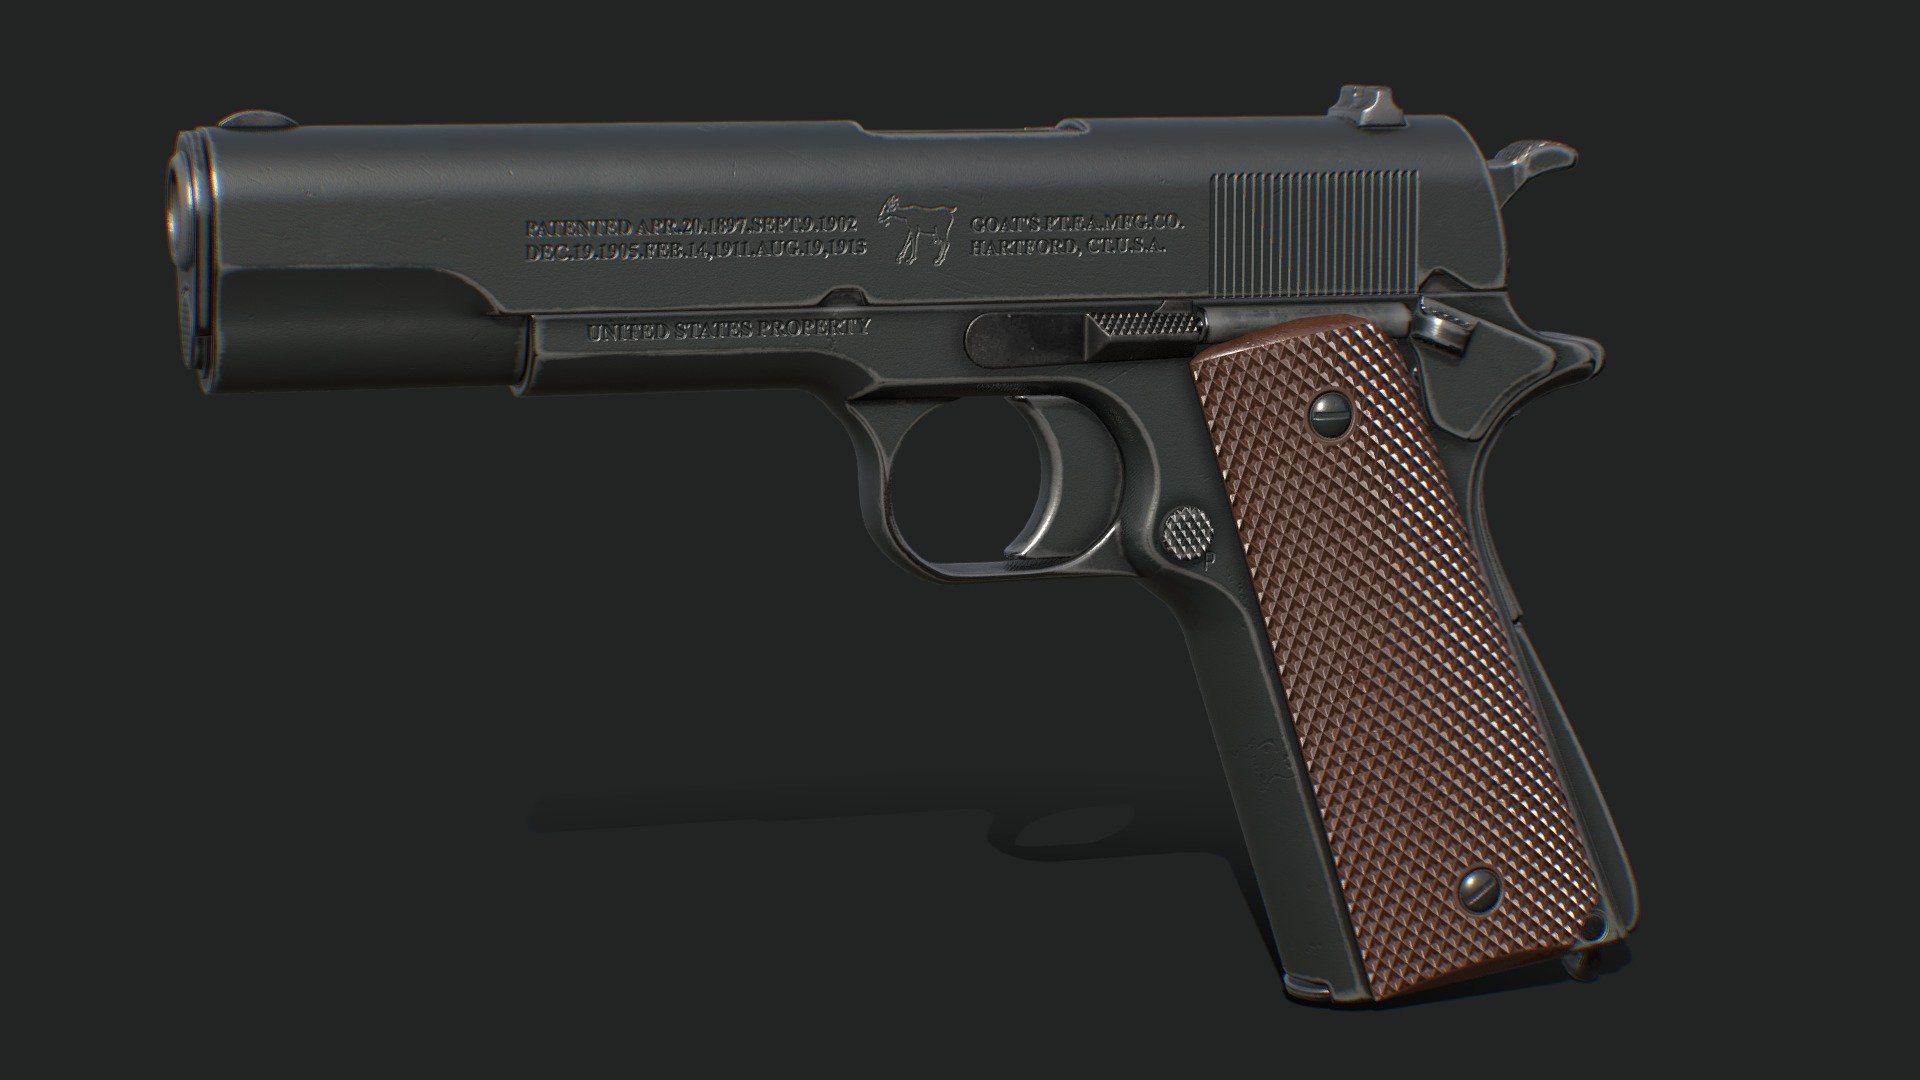 A 1911 pistol. Manufacturer name and logo made up.

Separate Parts parented to the frame include: Trigger, Hammer, Magazine, Slide lock, Safety, Magazine Release, Barrel.

Also includes a .45 cartridge with the shell and bullet as separate objects - 1911 Pistol - Buy Royalty Free 3D model by Firewarden 3d model